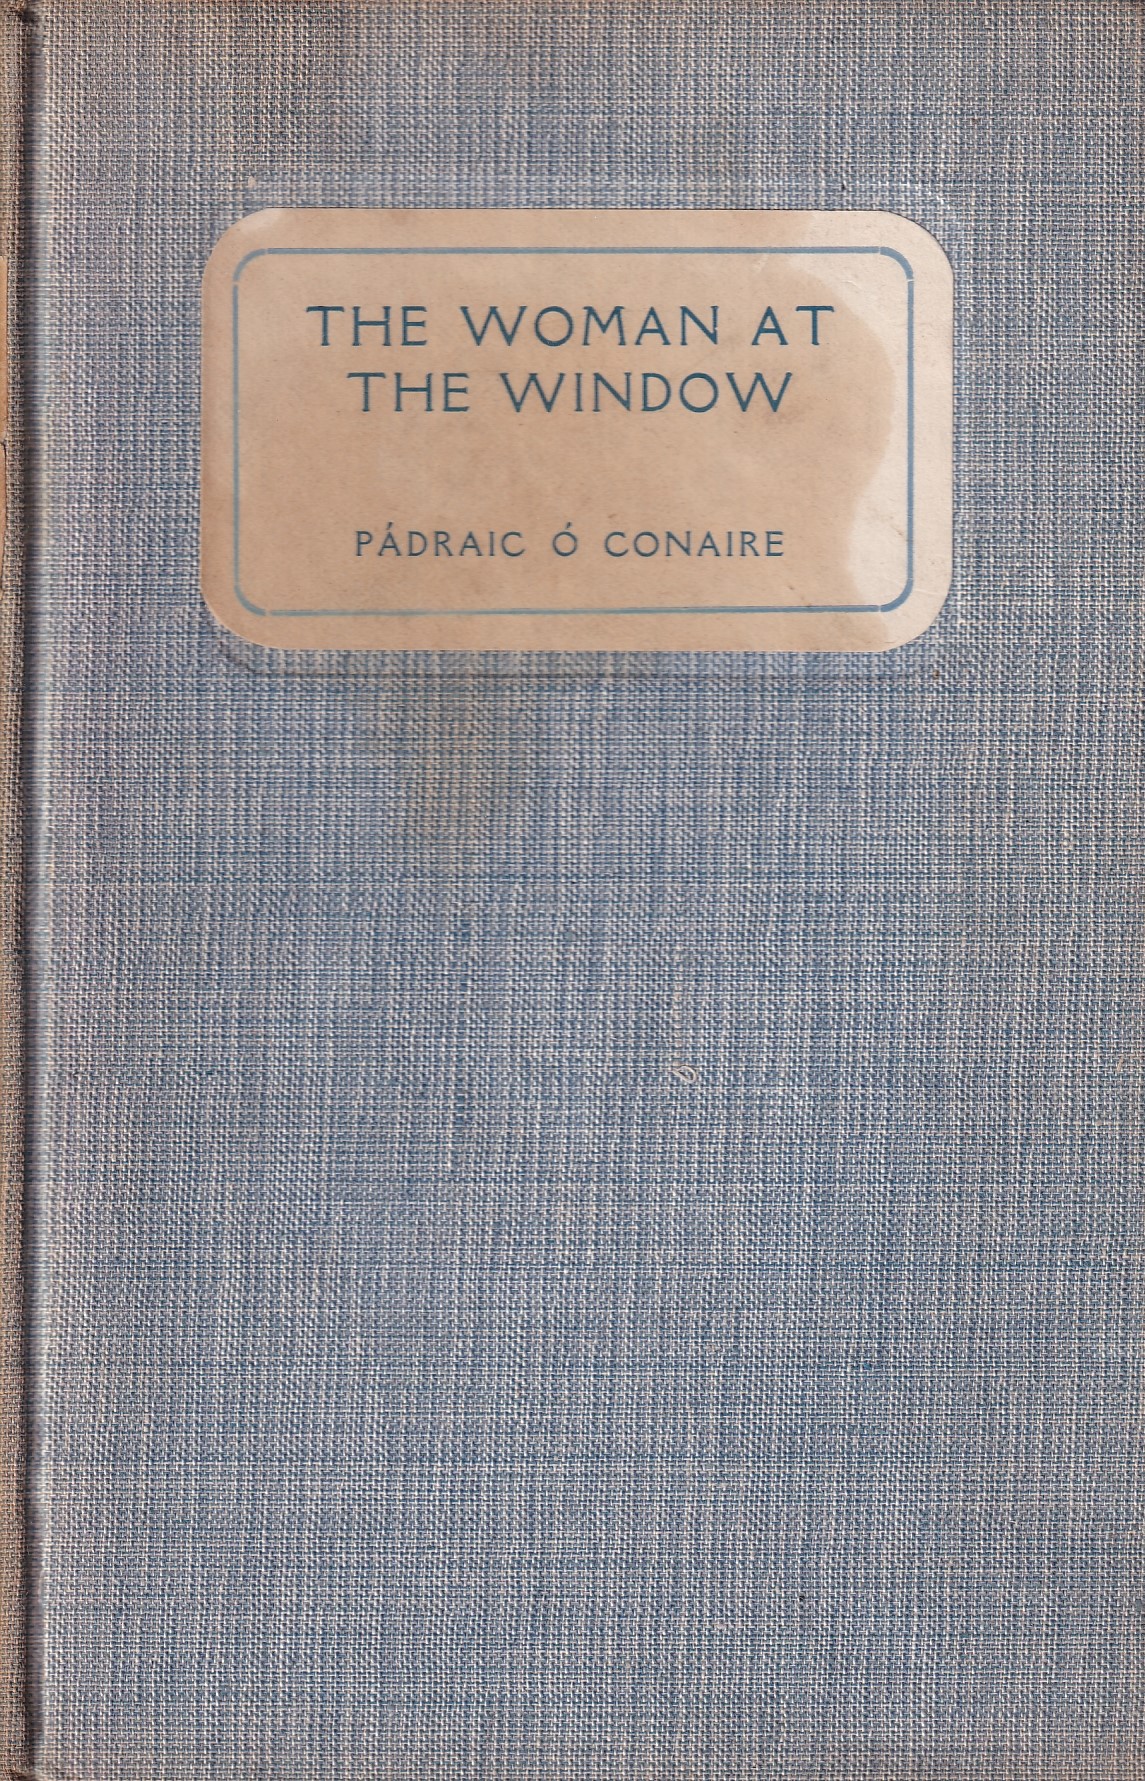 The Woman at the Window by Pádraic Ó Conaire